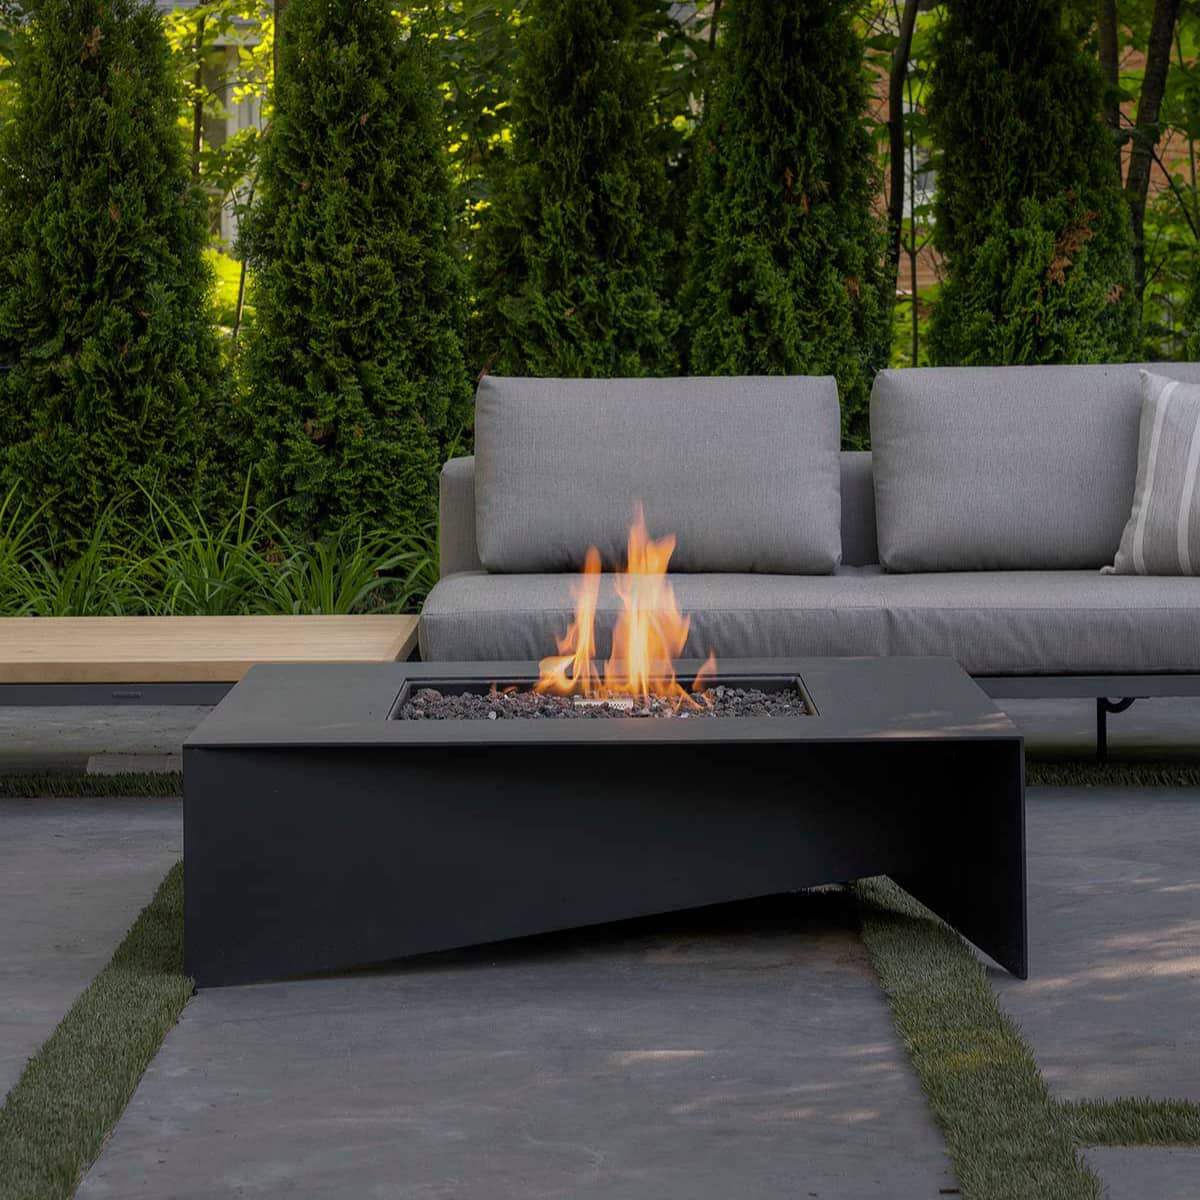 Ultimate Fire Pit Outdoor Fireplace, Hottest Outdoor Propane Fire Pit